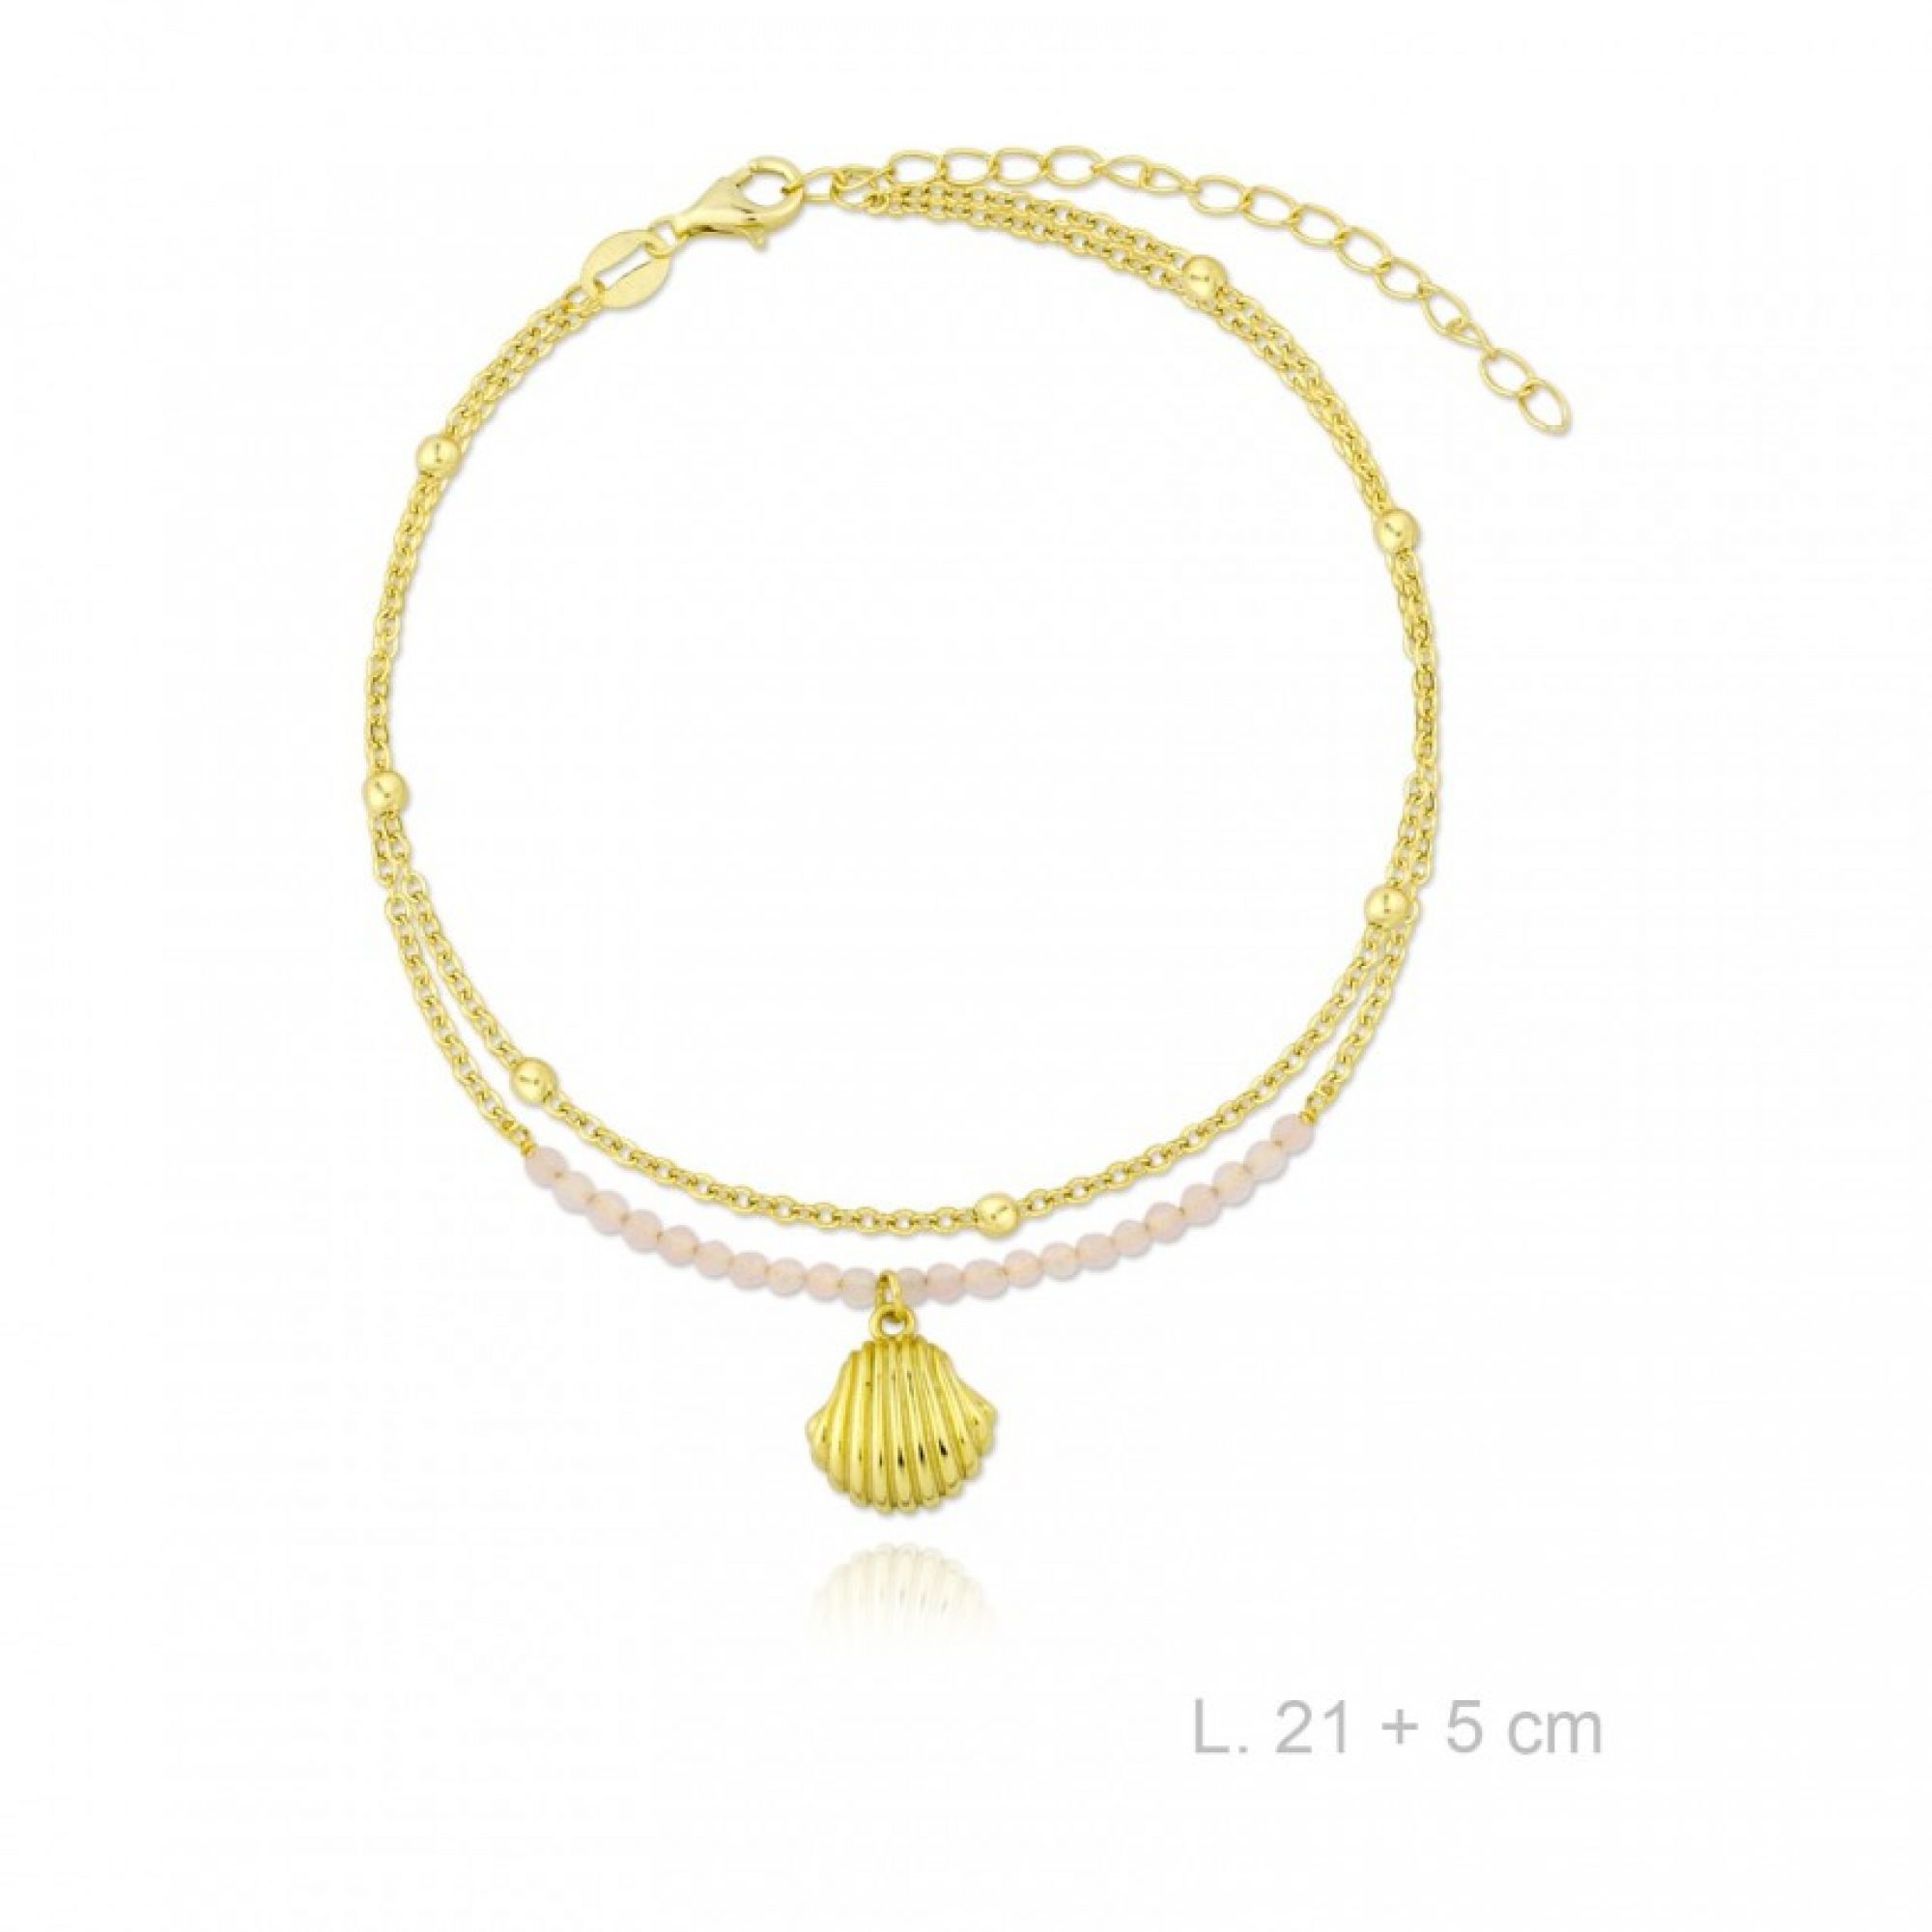 Gold plated double chain anklet with dangle seashell